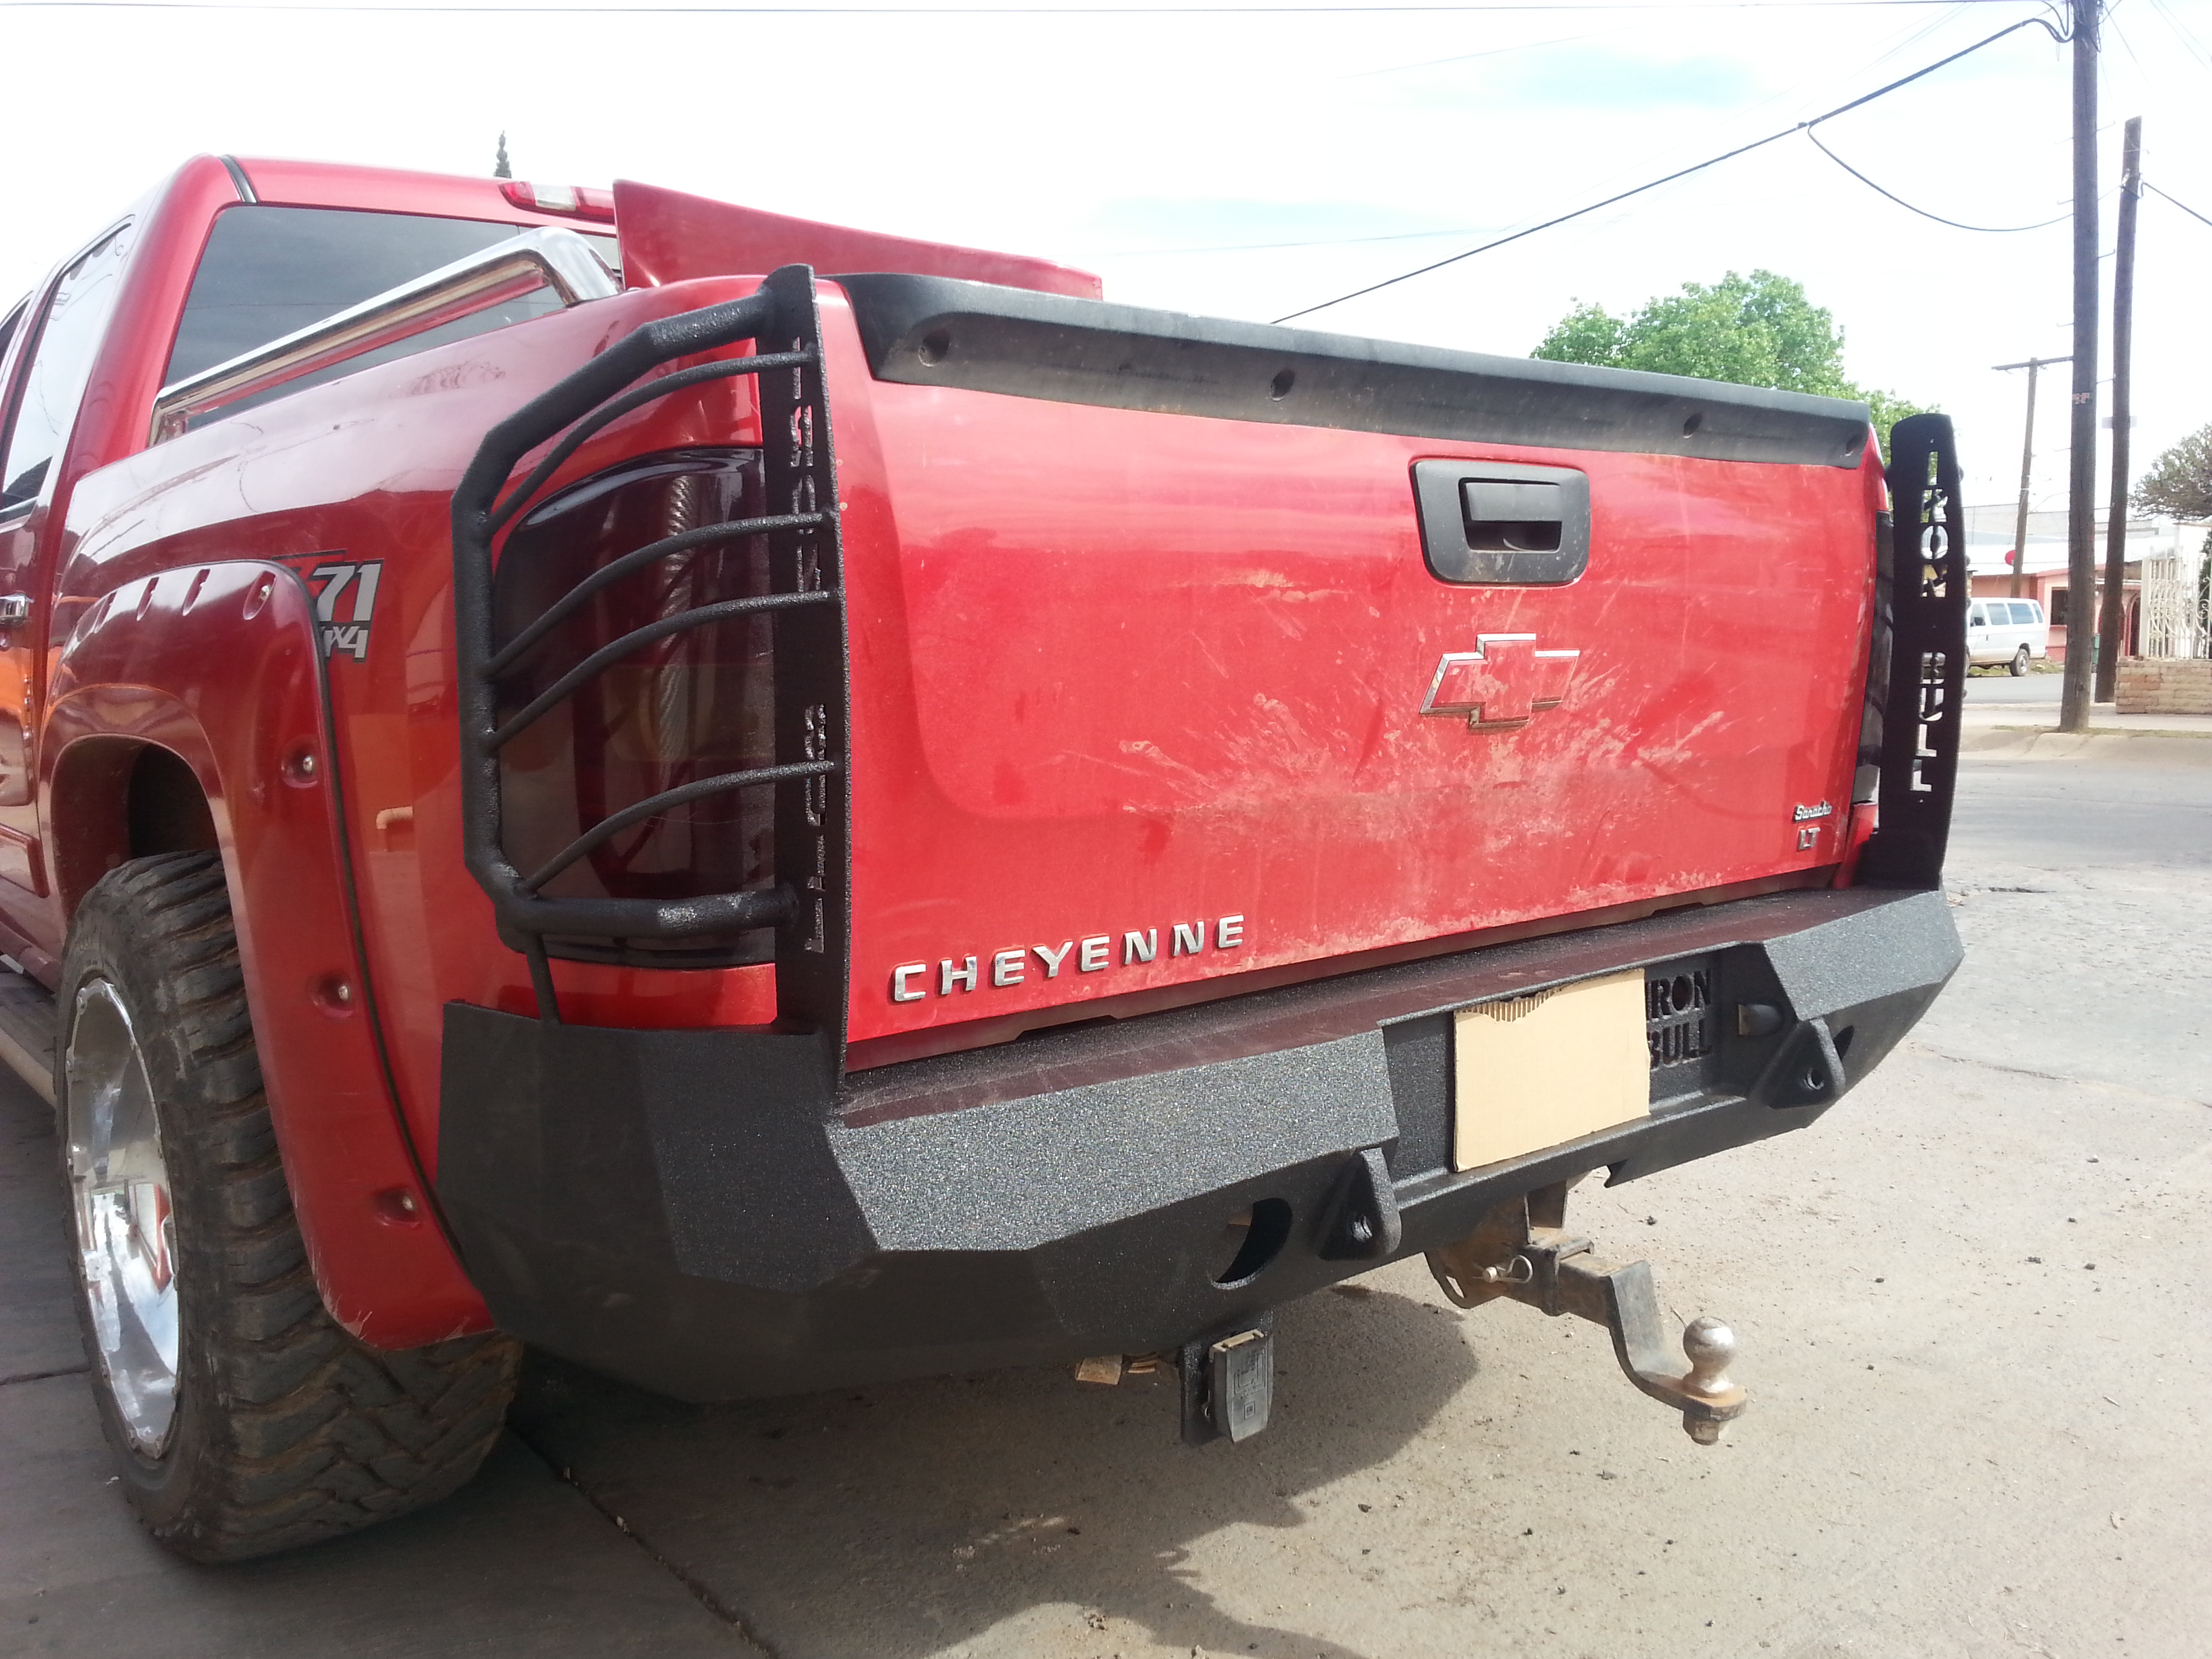 07-14 Chevy 1500 rear base bumper with tail light guards